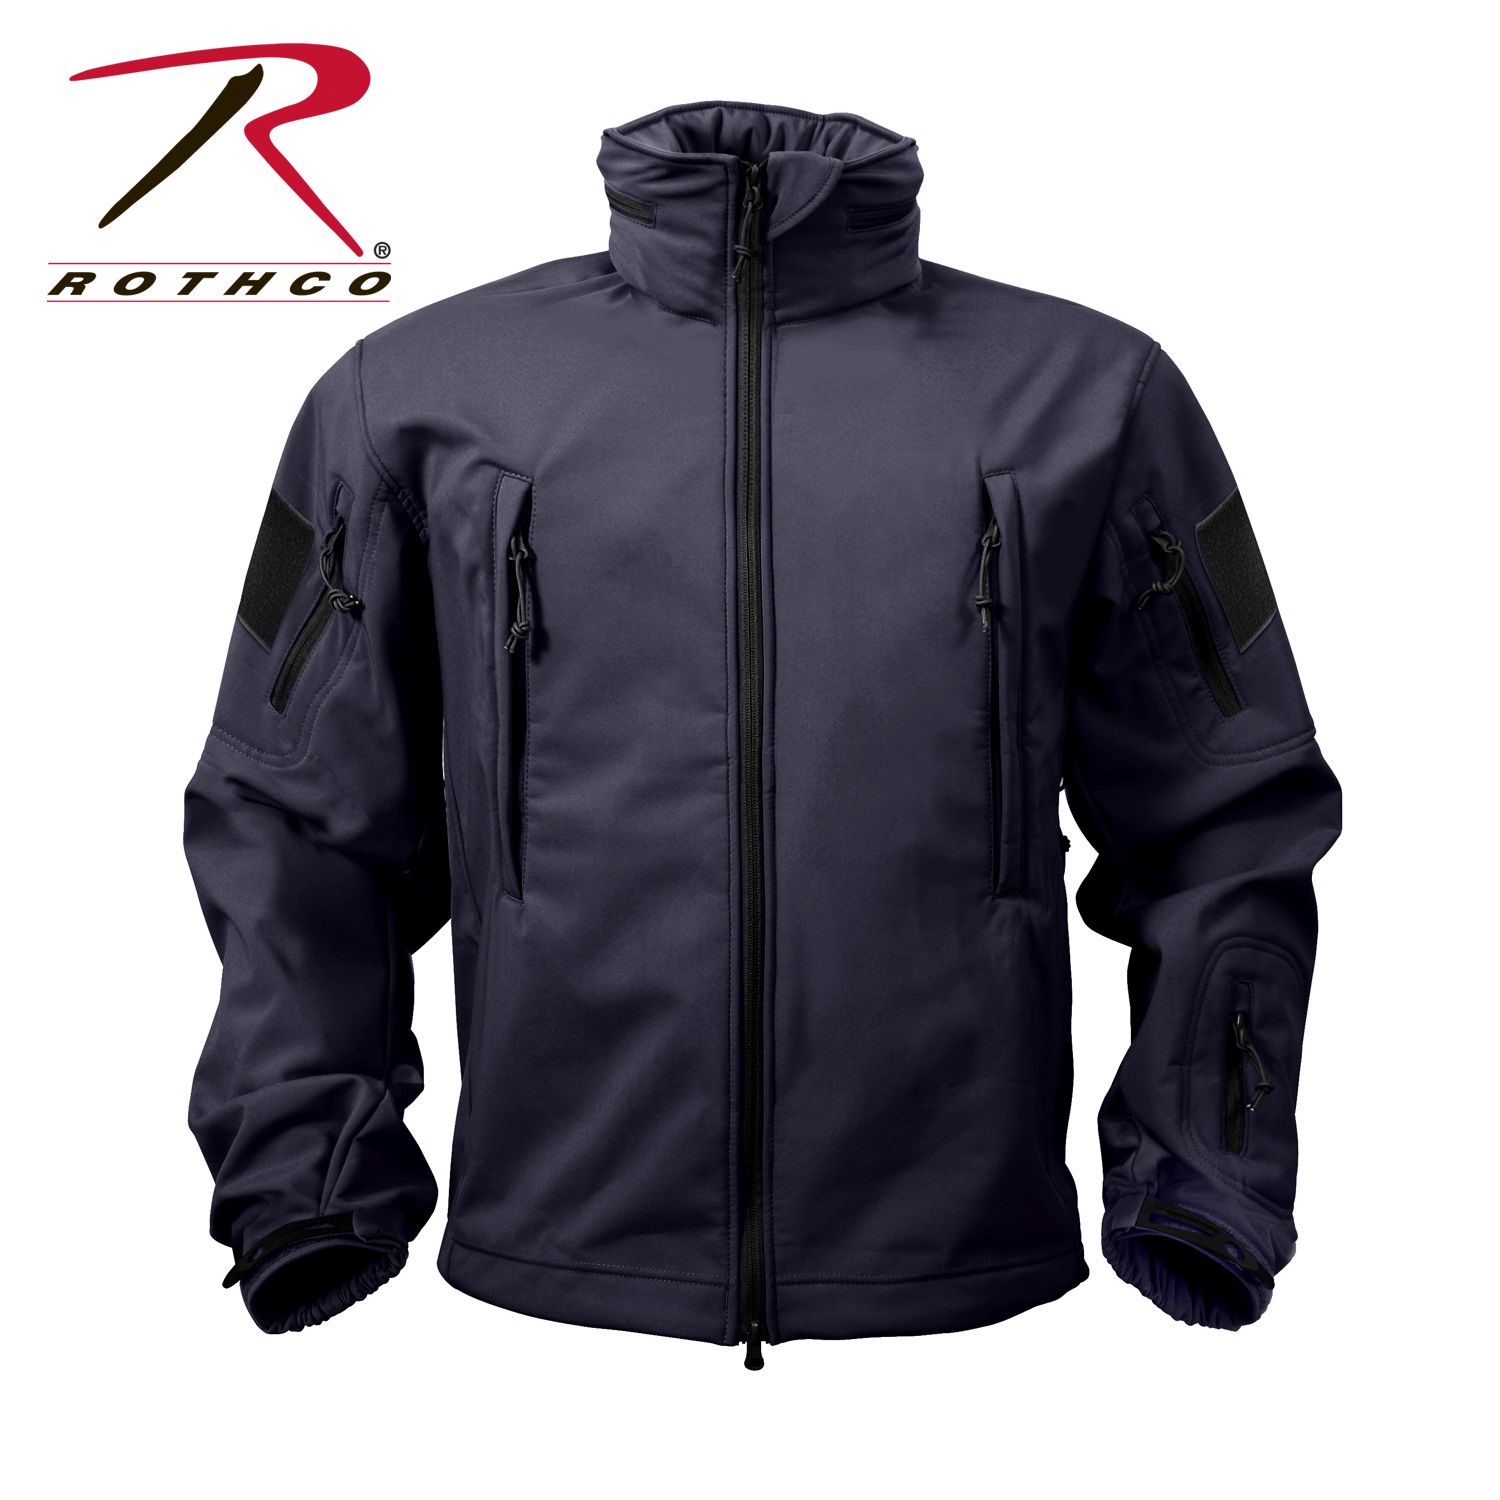 Rothco Spec Ops Tactical Softshell Jacket Size Chart